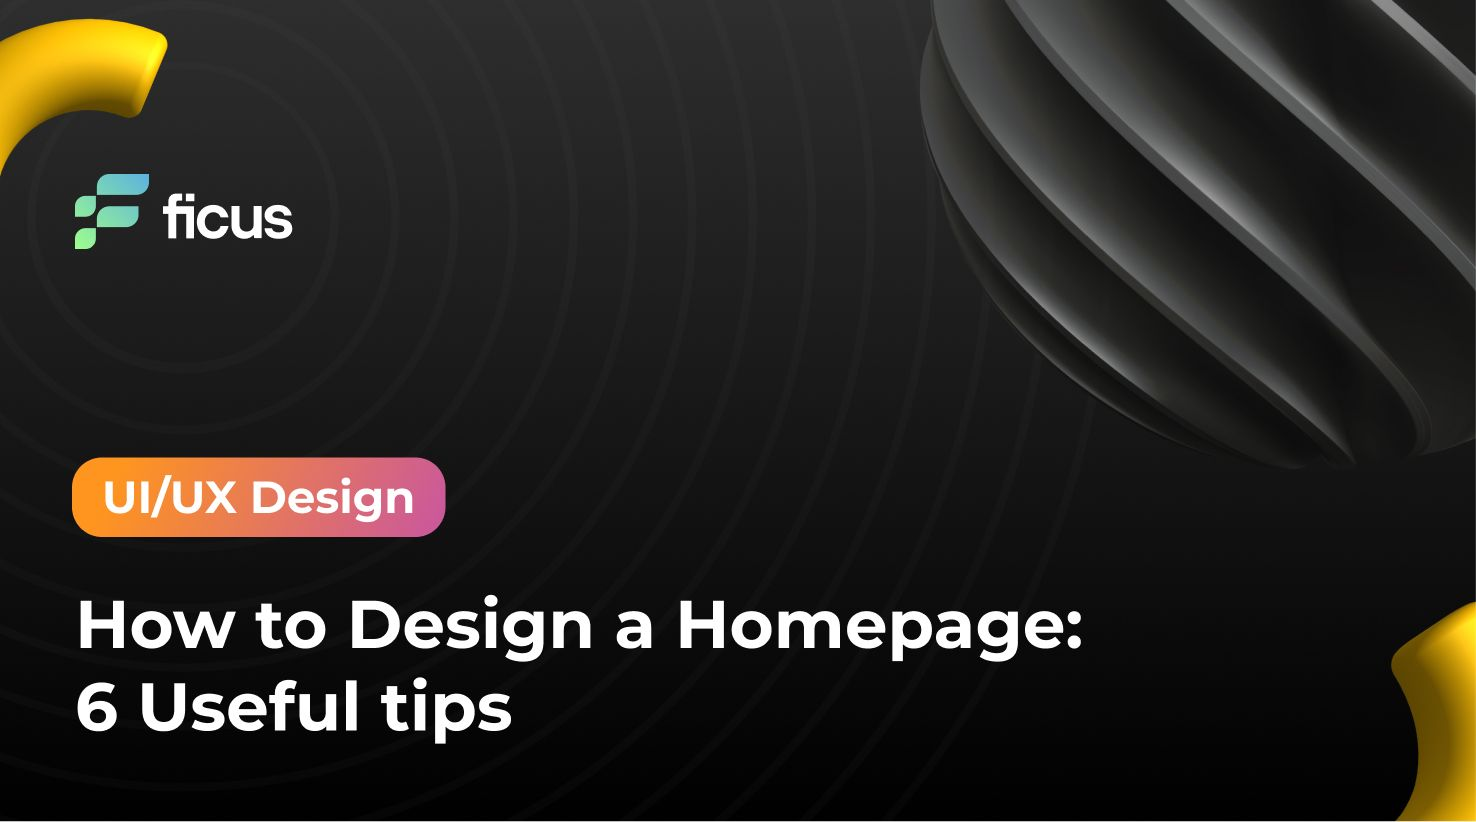 How to Design a Homepage: 6 Useful tips